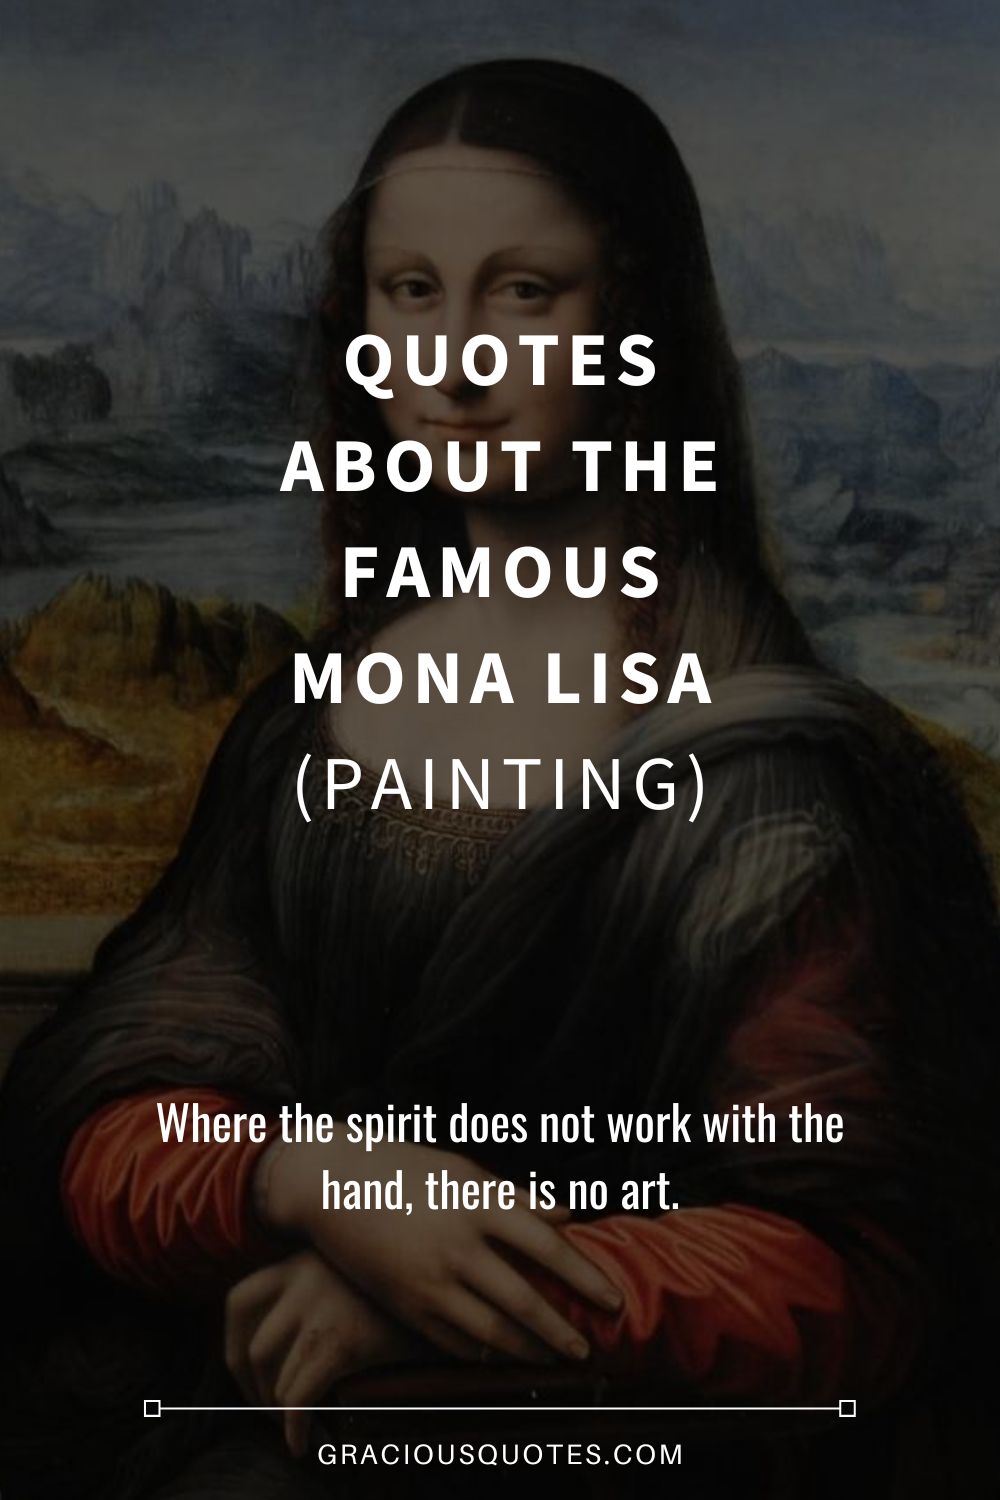 Quotes About the Famous Mona Lisa (PAINTING) - Gracious Quotes